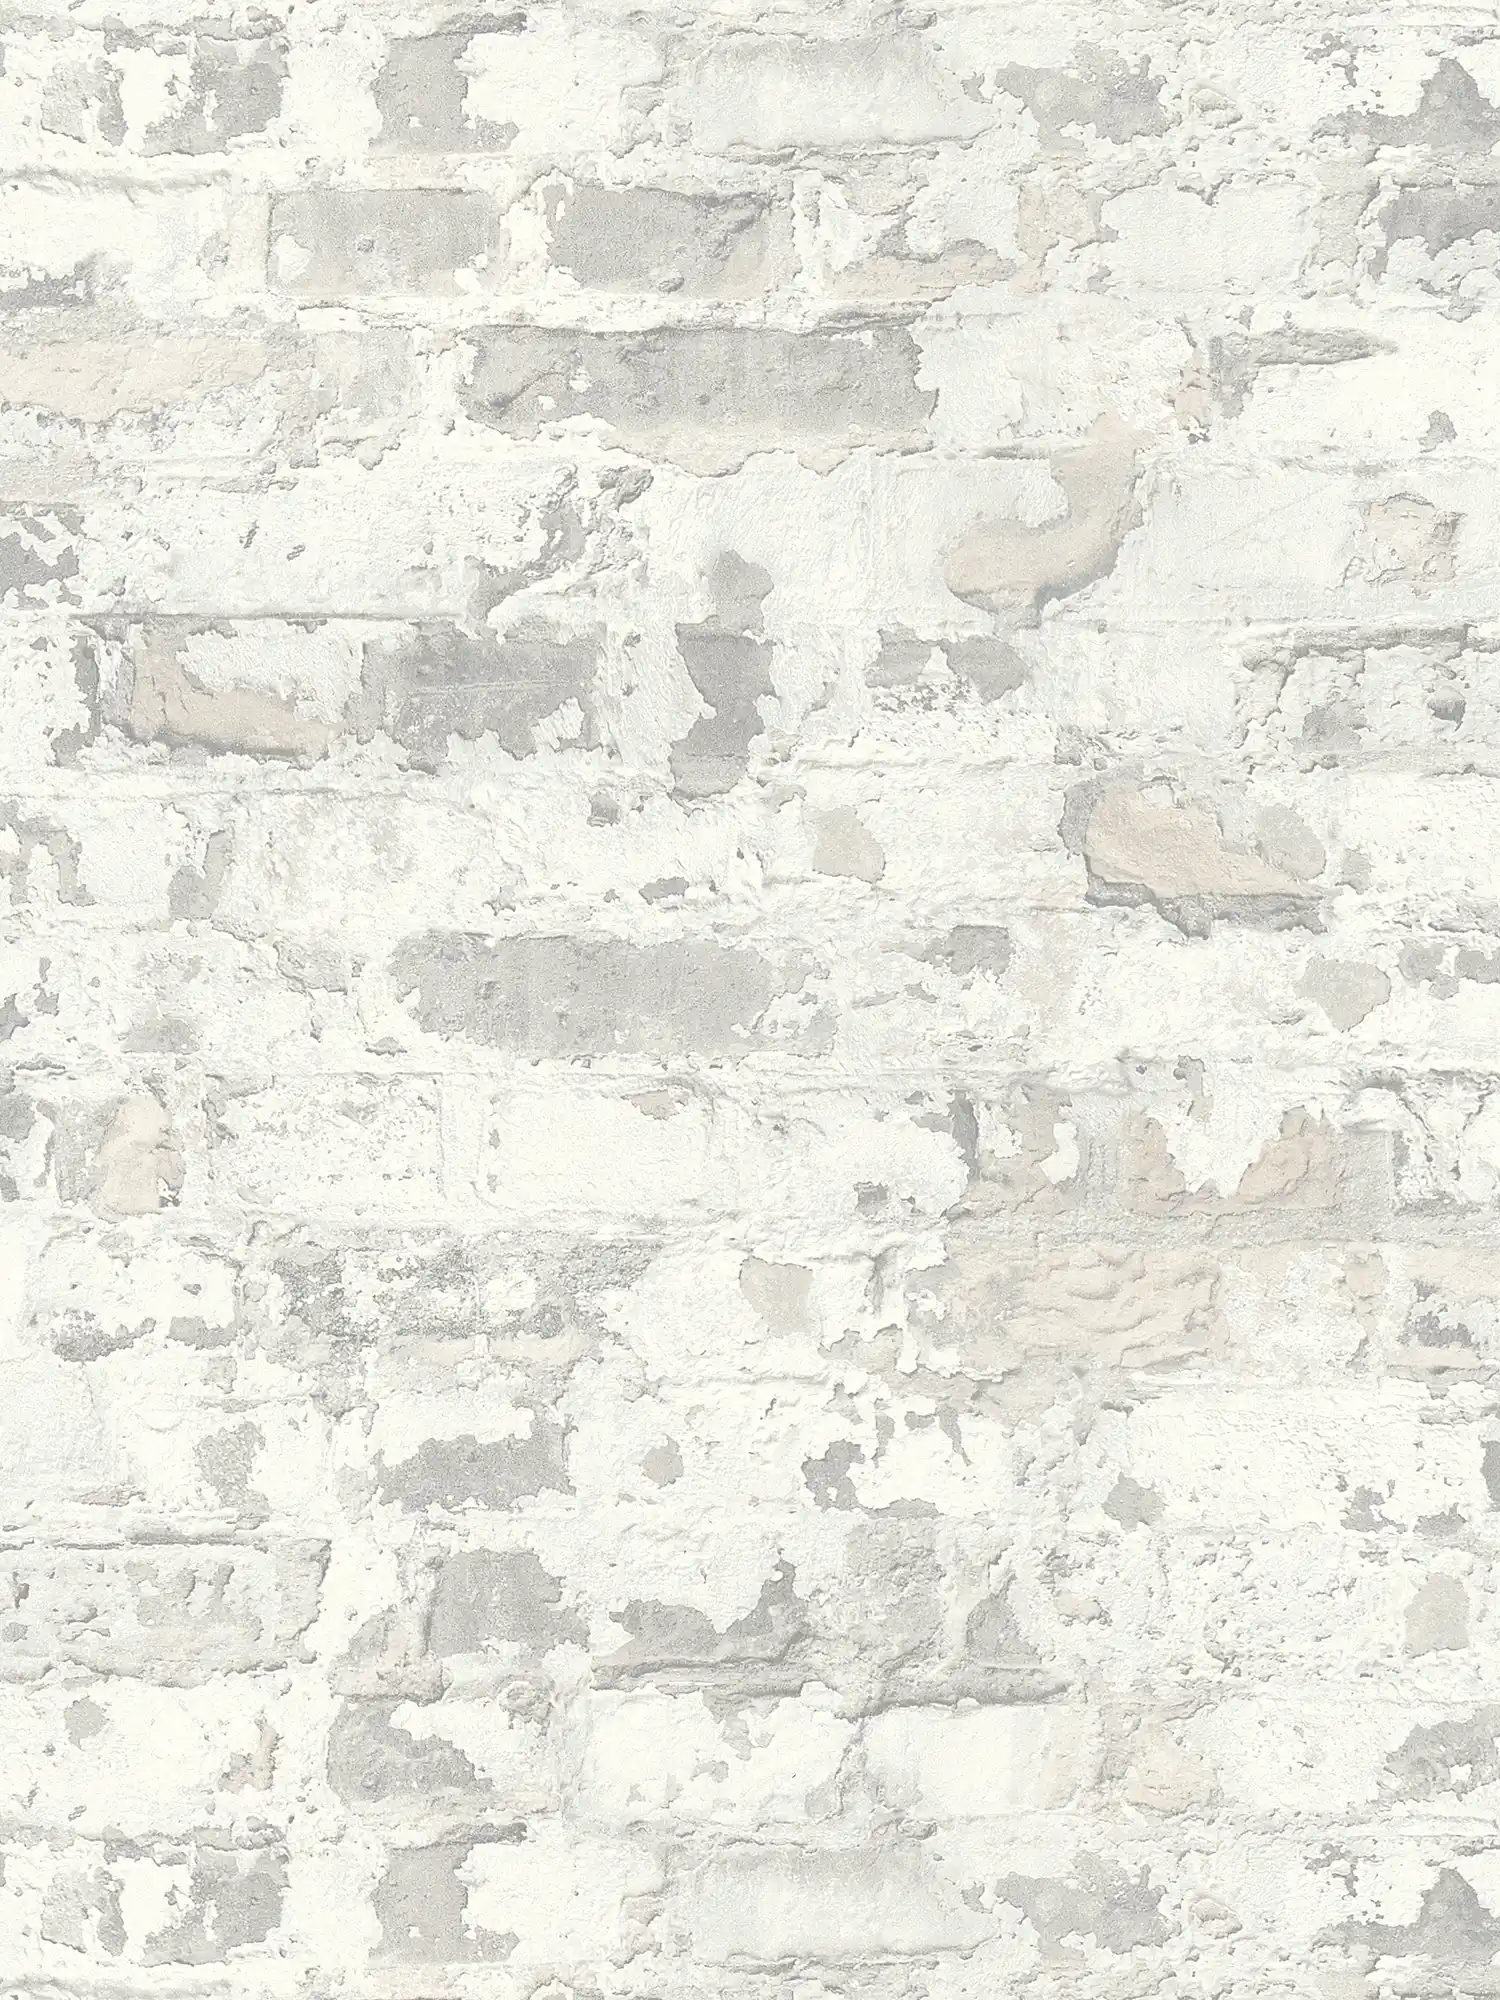         Stone wallpaper brick wall in country style - grey, white
    